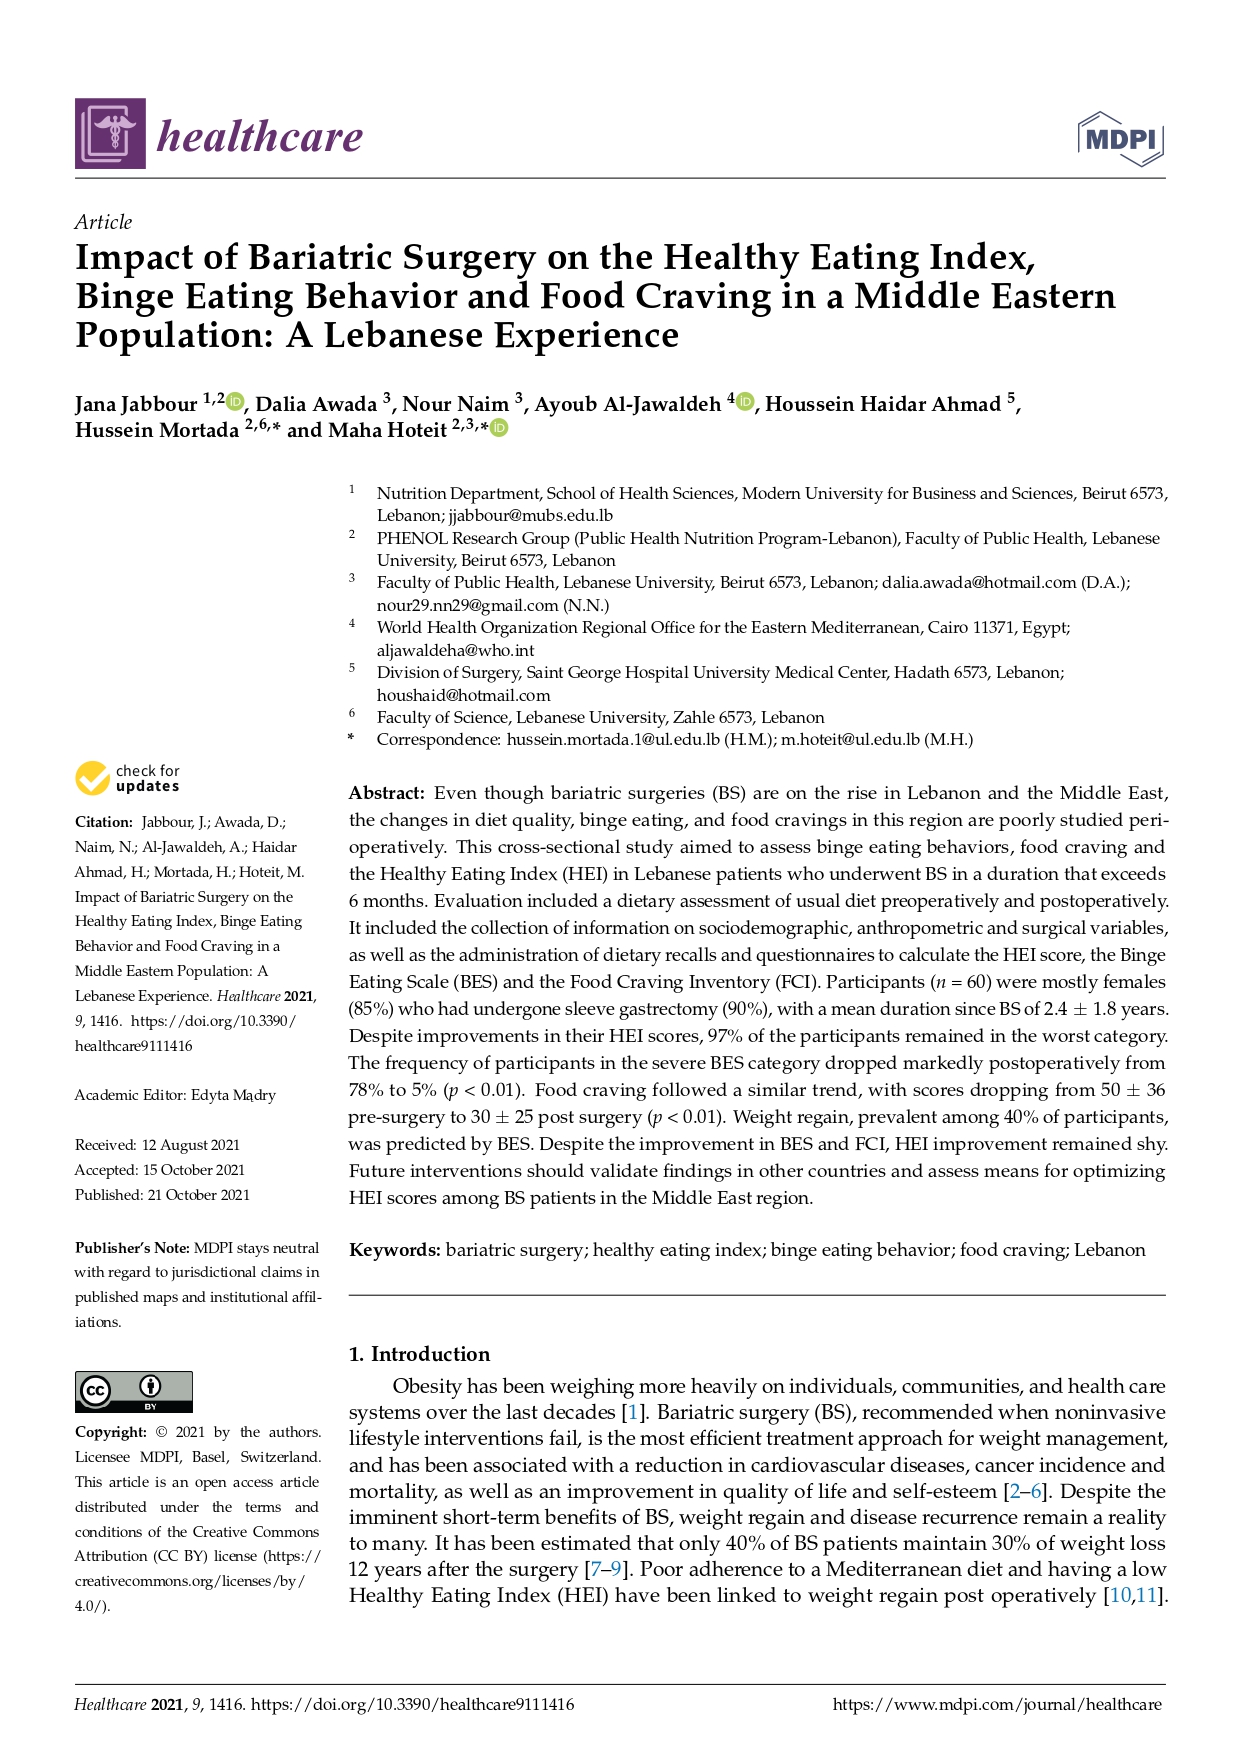 impact_of_bariatric_surgery_on_the_healthy_eating_index_binge_eating_behavior_and_food_craving_in_a_middle_eastern_population_a_lebanese_experience